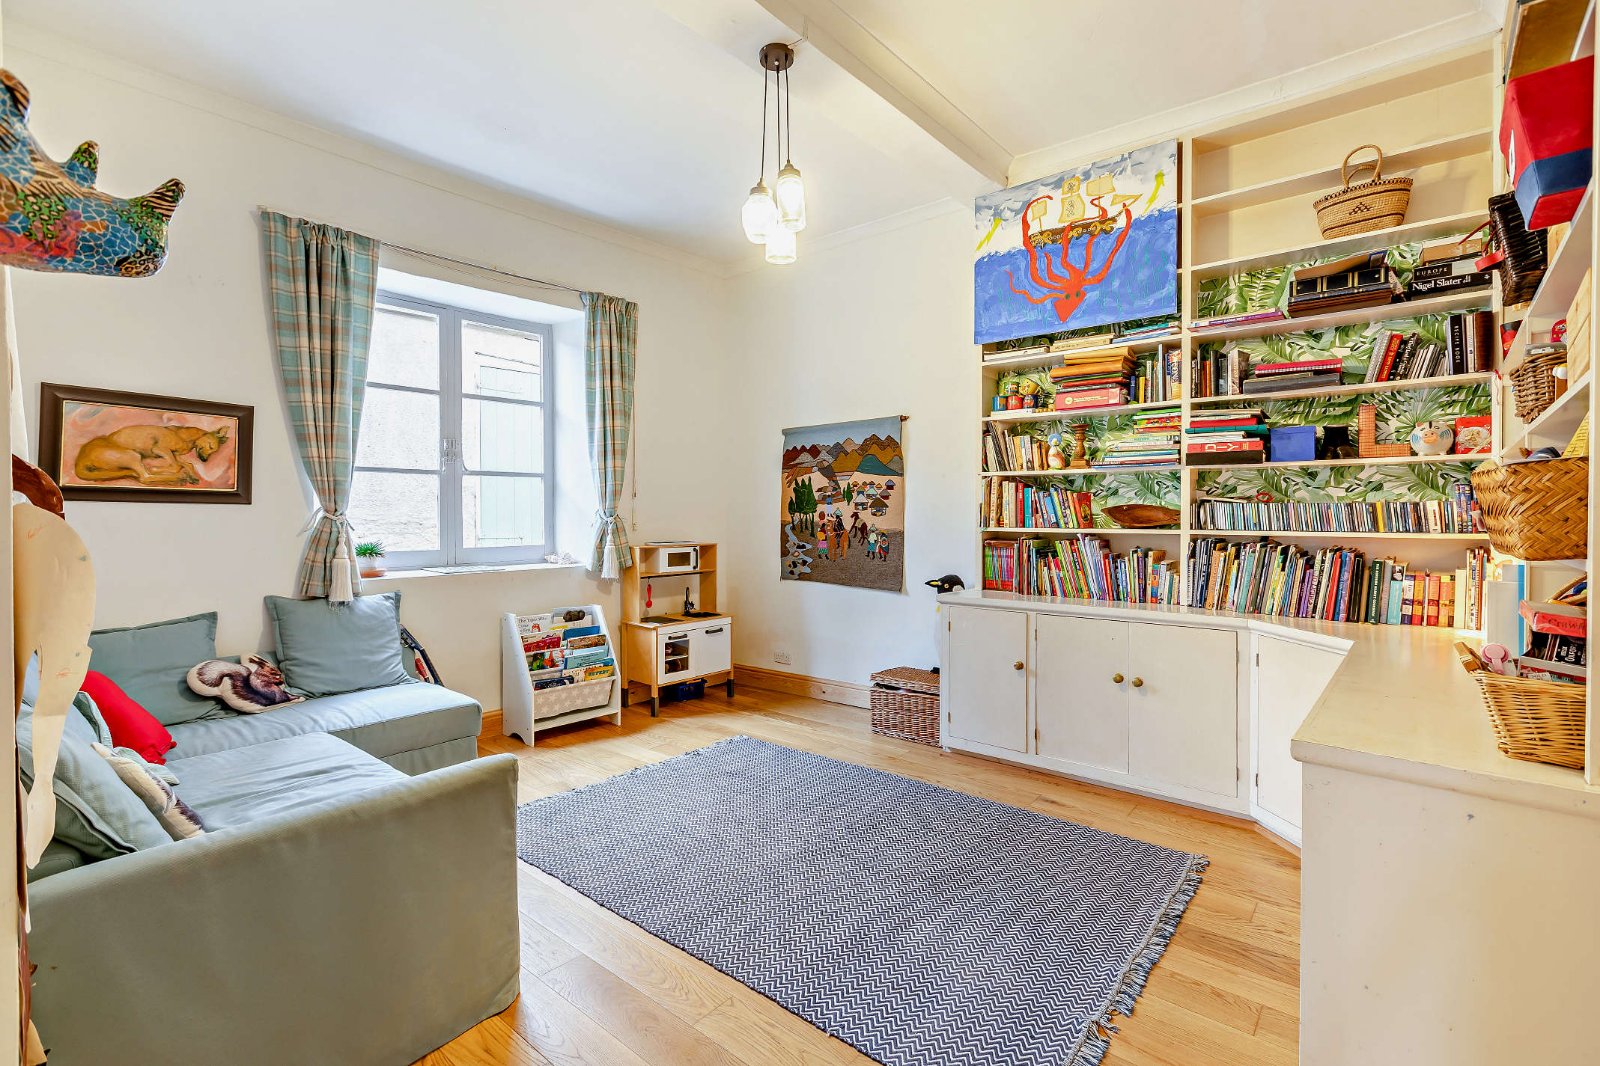 Library/Play Room